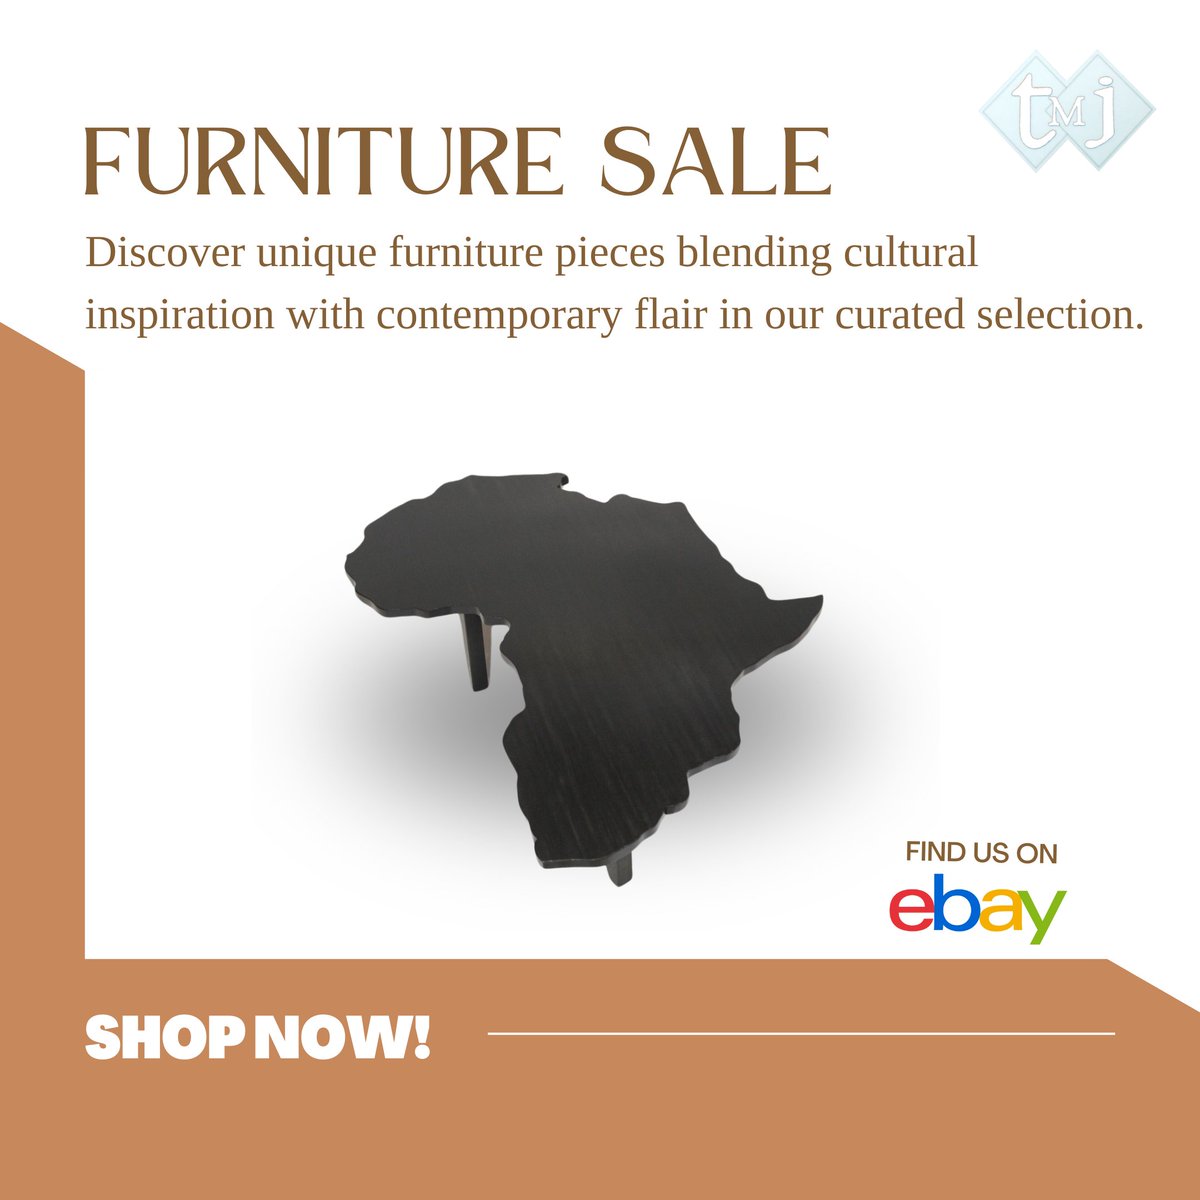 Discover the perfect fusion of culture and modern design with TMJ Designs!  And now, finding us on eBay has never been easier! Start browsing and give your home a touch of TMJ's signature charm.

#TMJDesigns #shopwithus #eBayfinds #Furnituresale